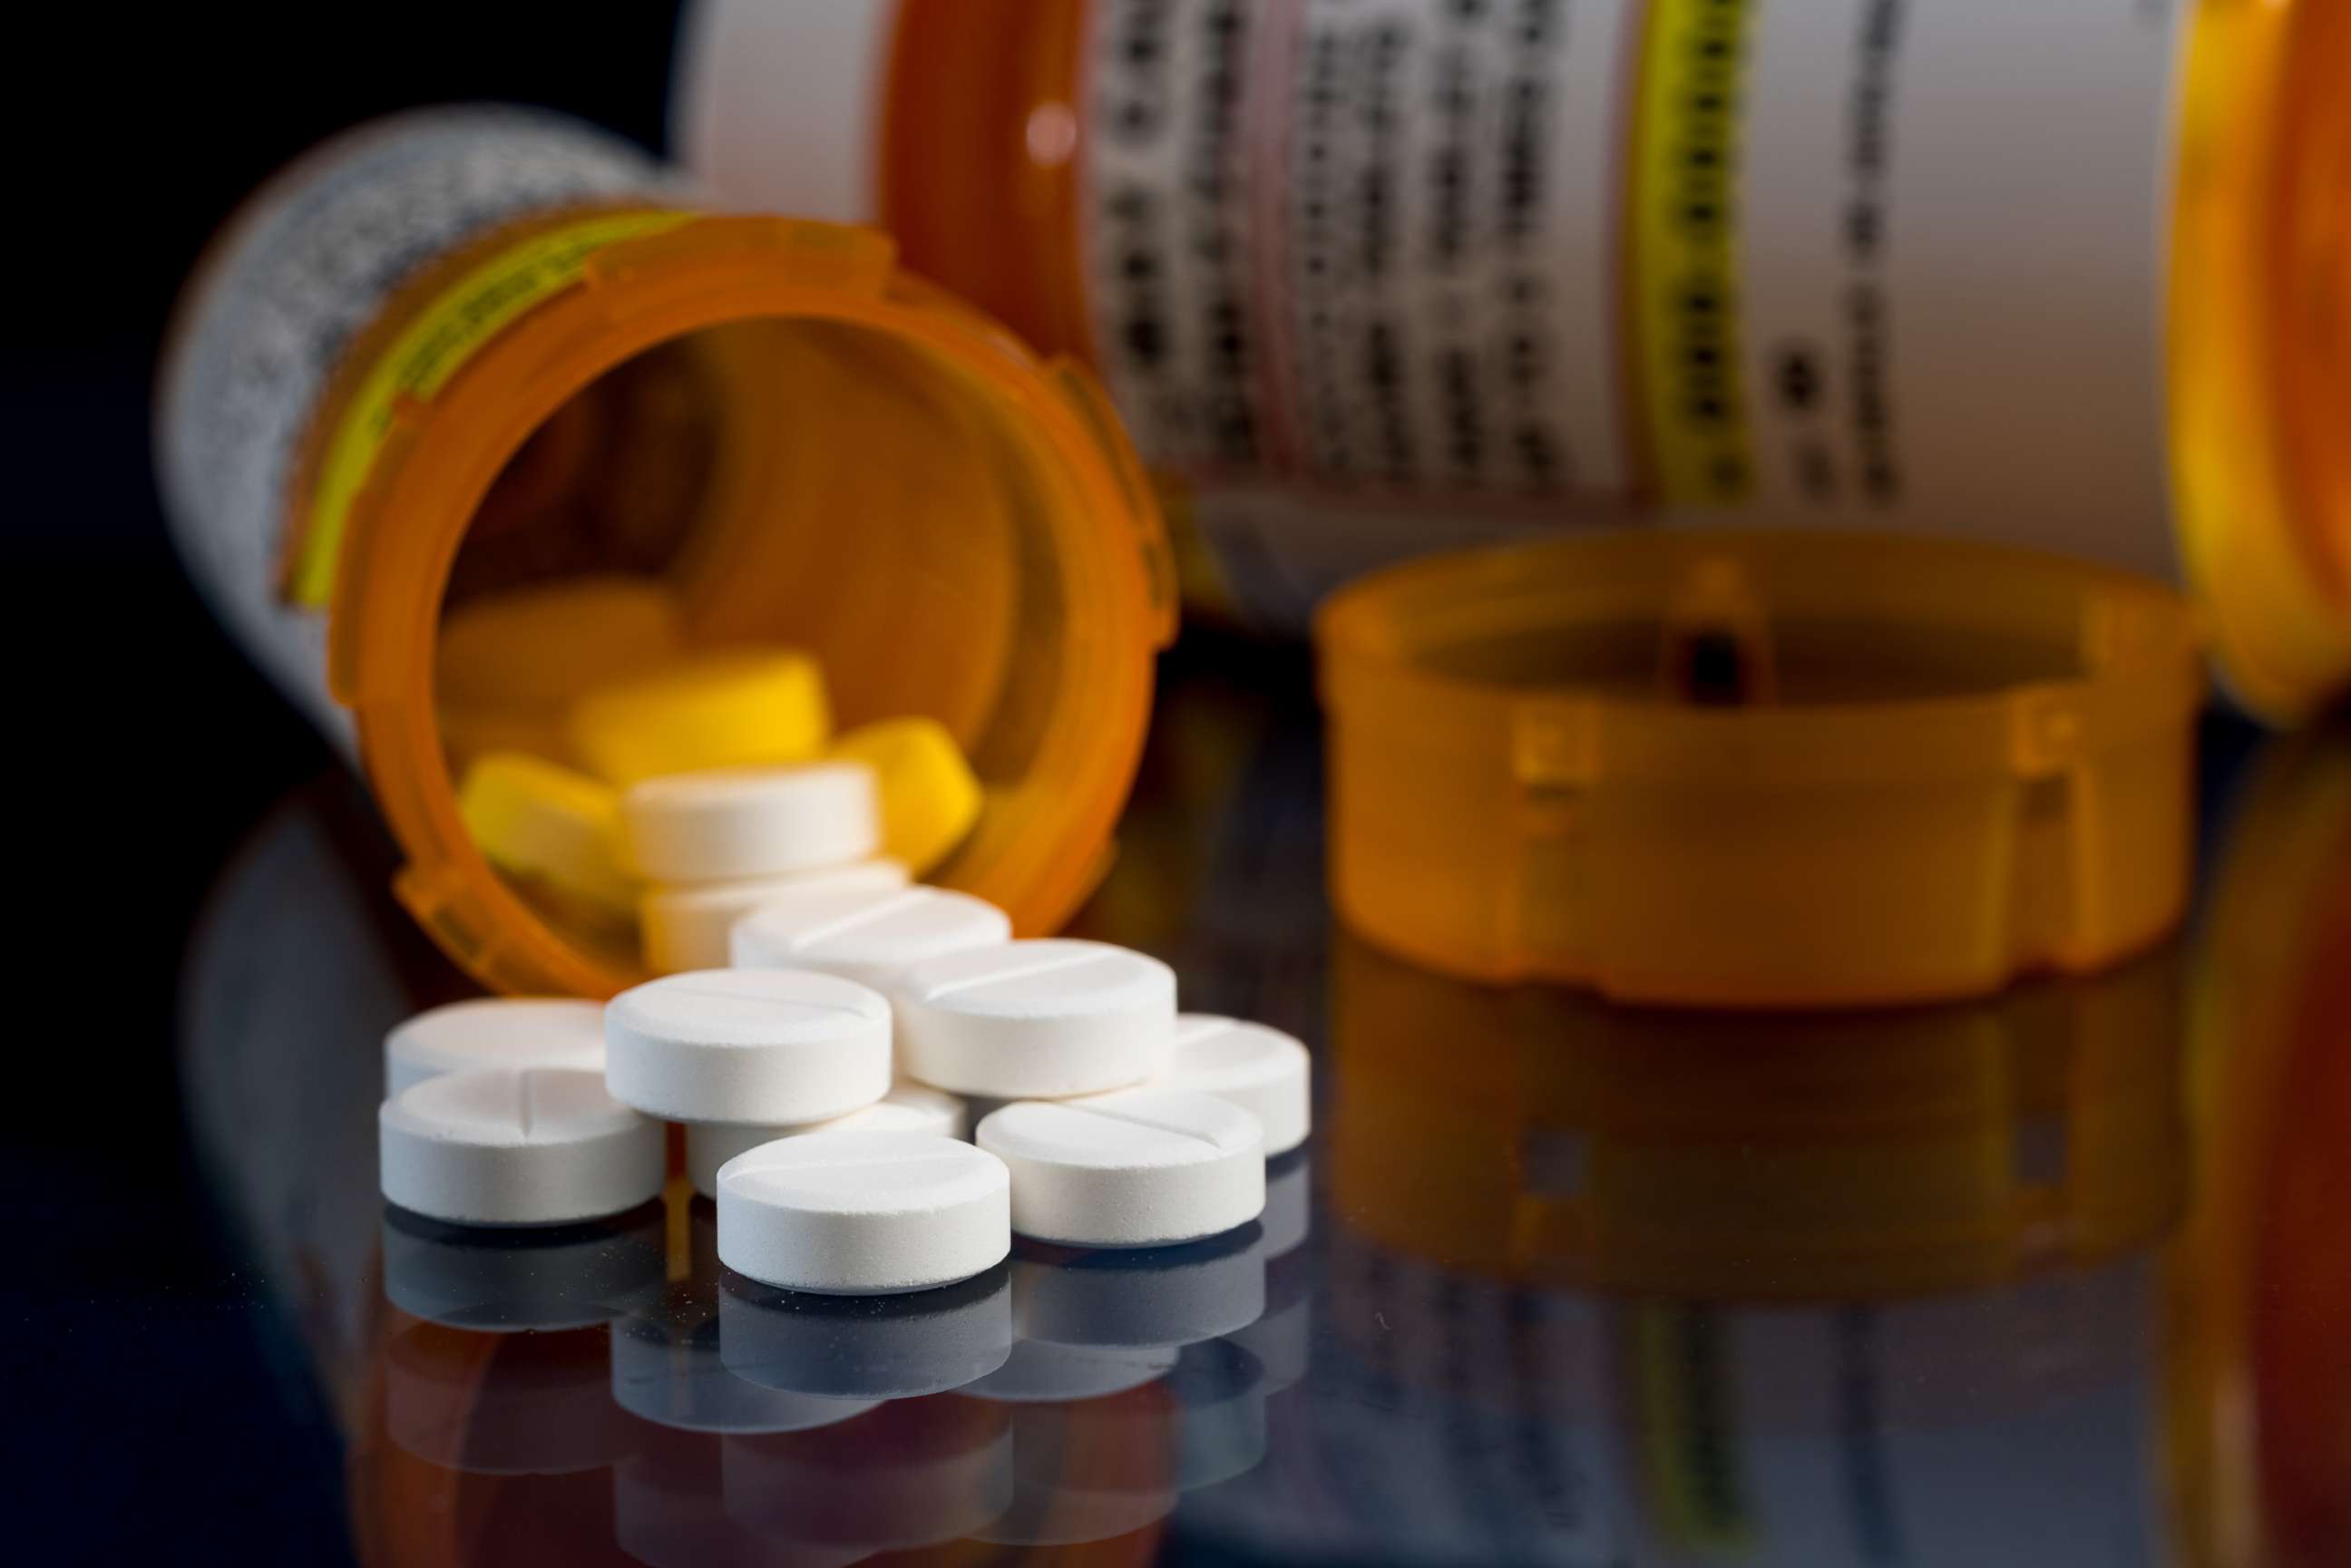 PHOTO: Opioid painkiller tablets spill out of a prescription bottle in an undated stock image.